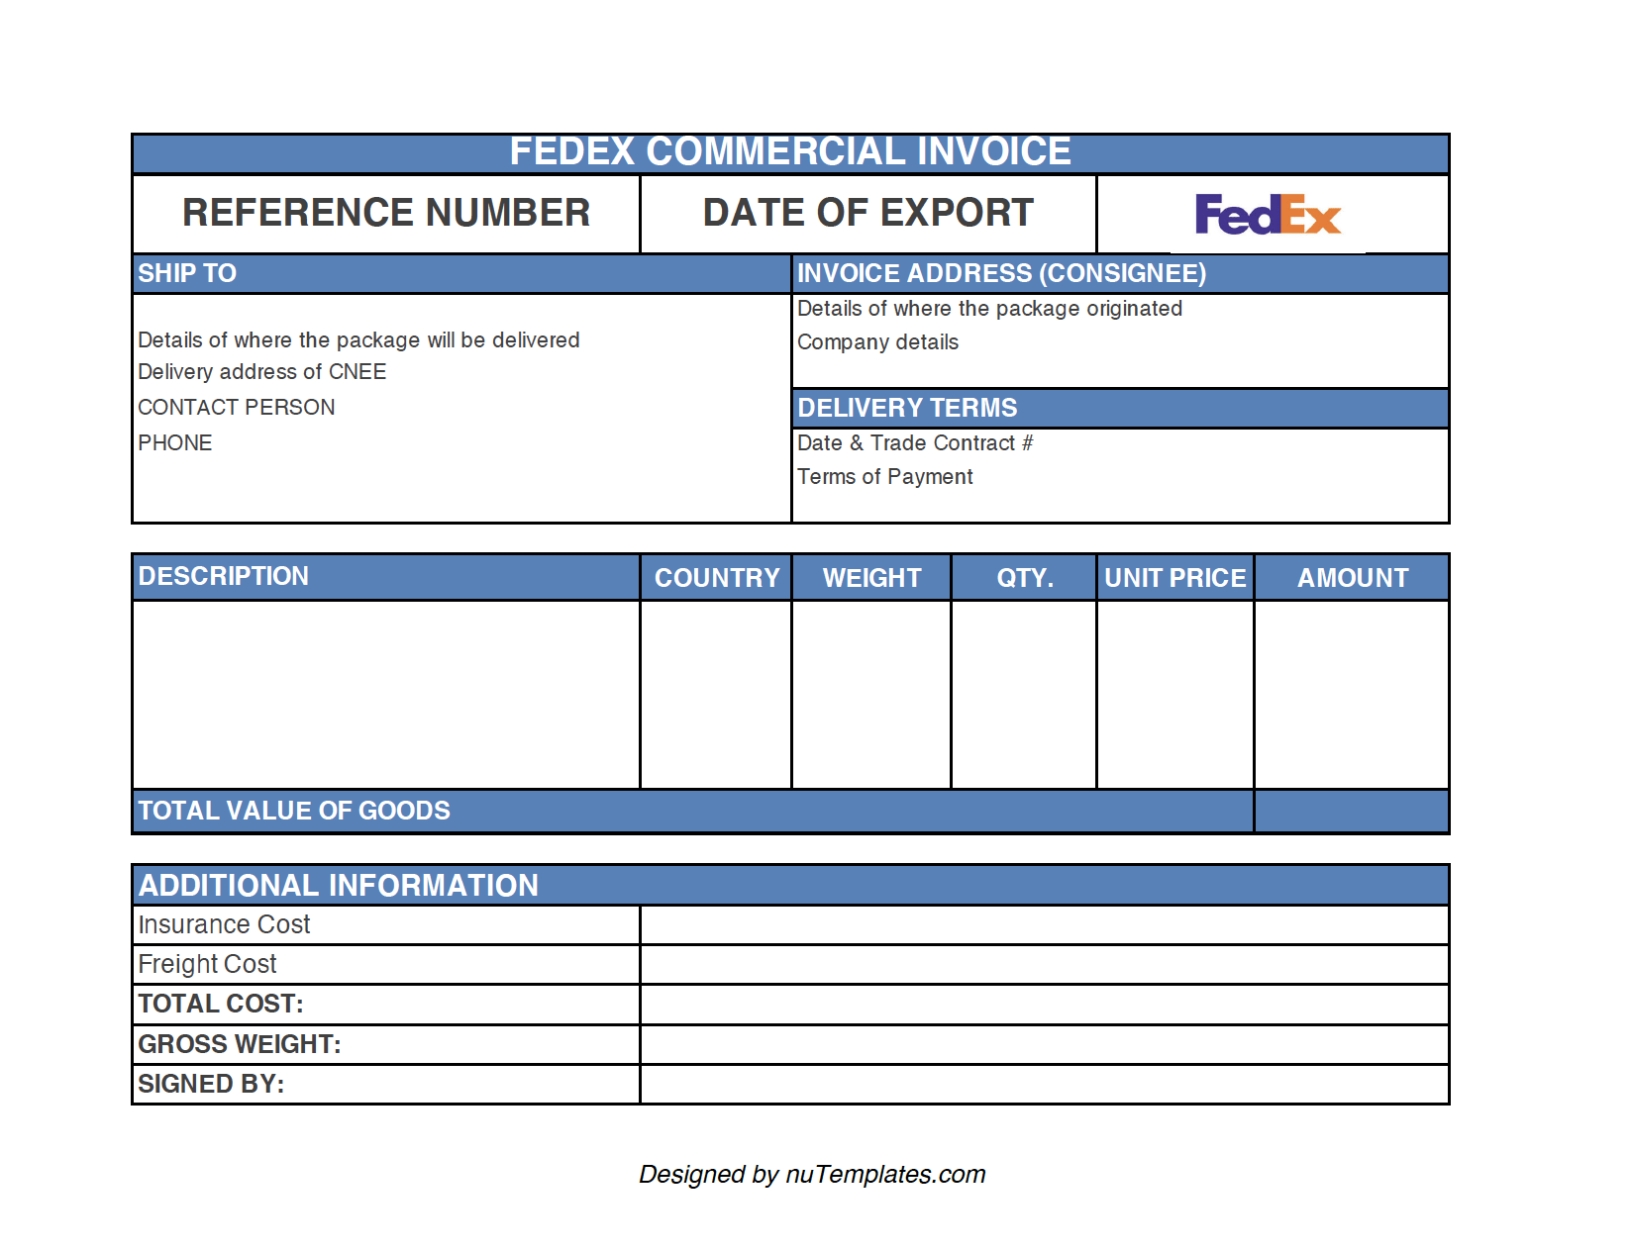 Fedex Commercial Invoice Template - Fedex Invoices | Nutemplates With Regard To Proforma Invoice Template Fedex